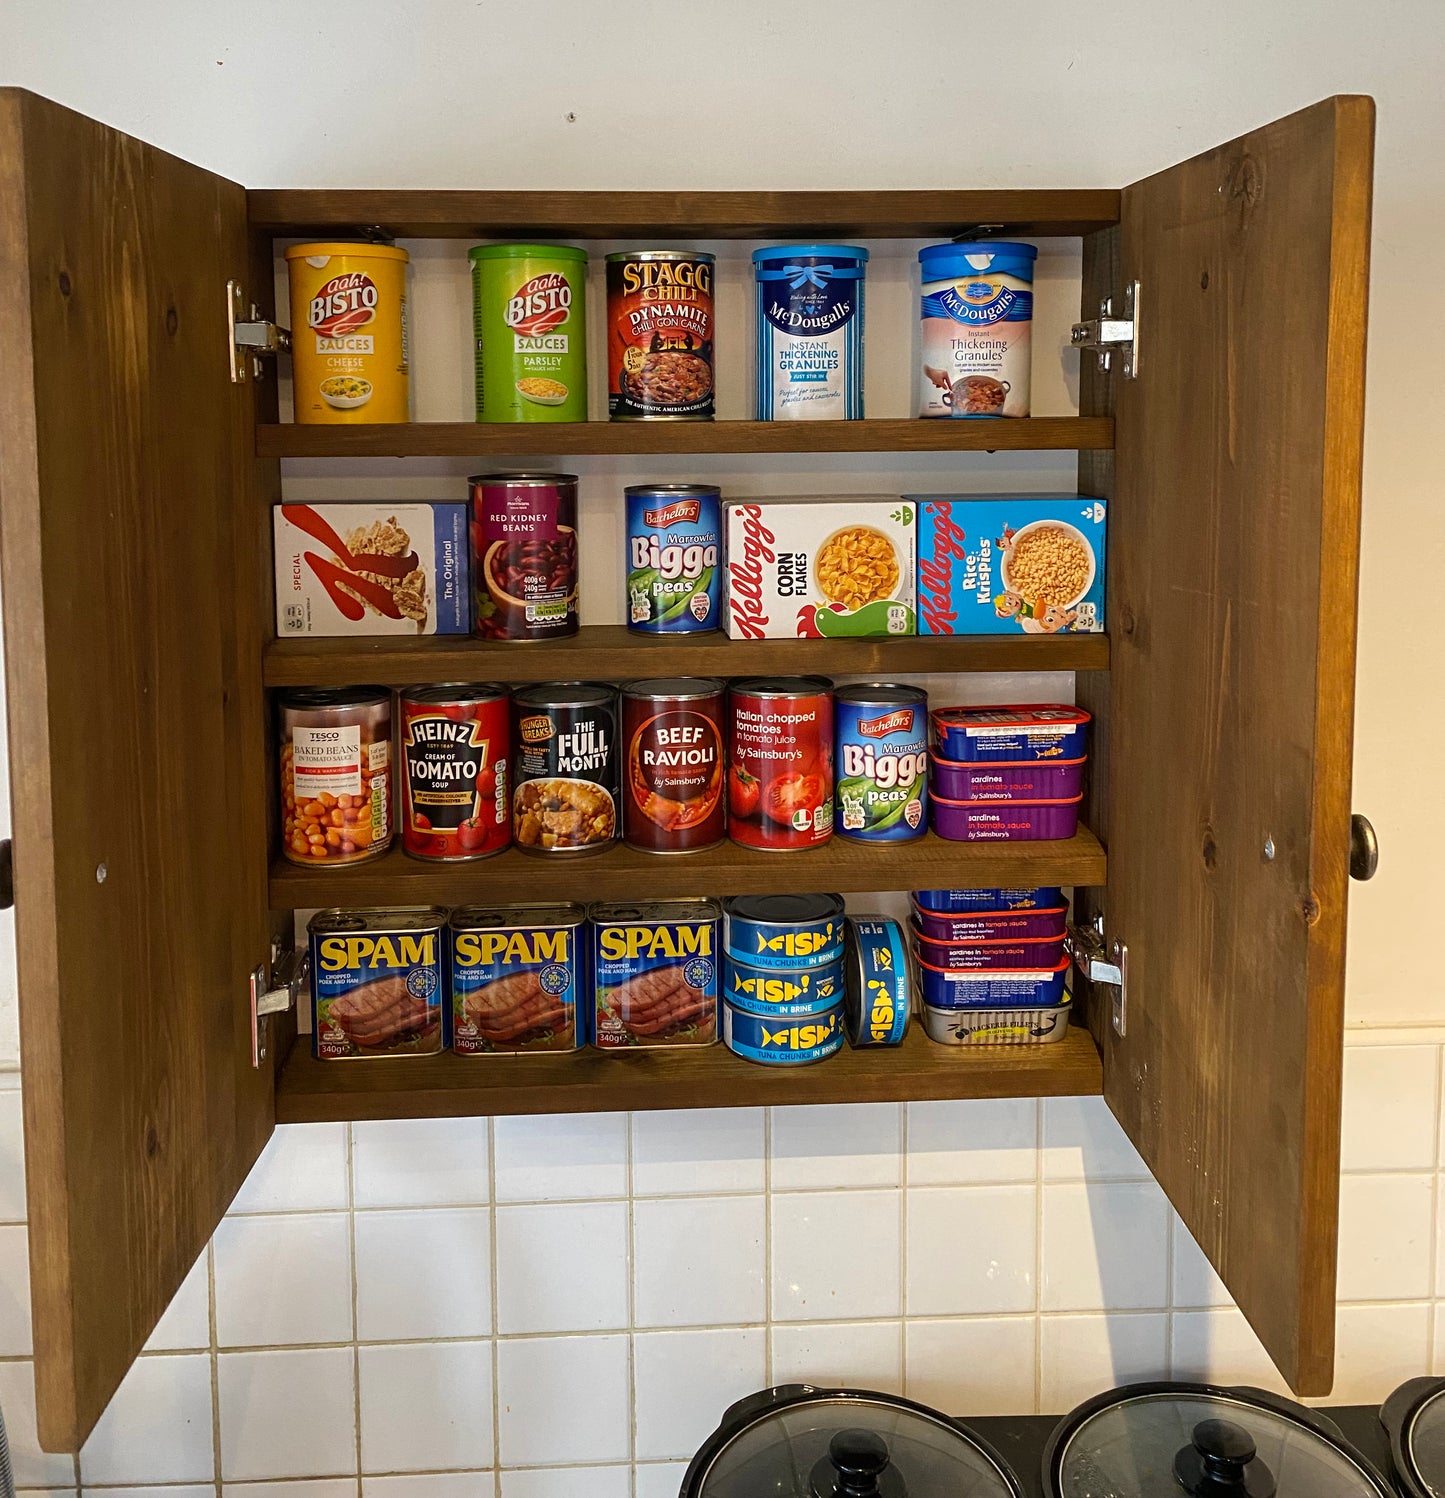 Introducing Our Versatile Can Cupboard – Space-Saving Solution for Kitchen or Pantry!